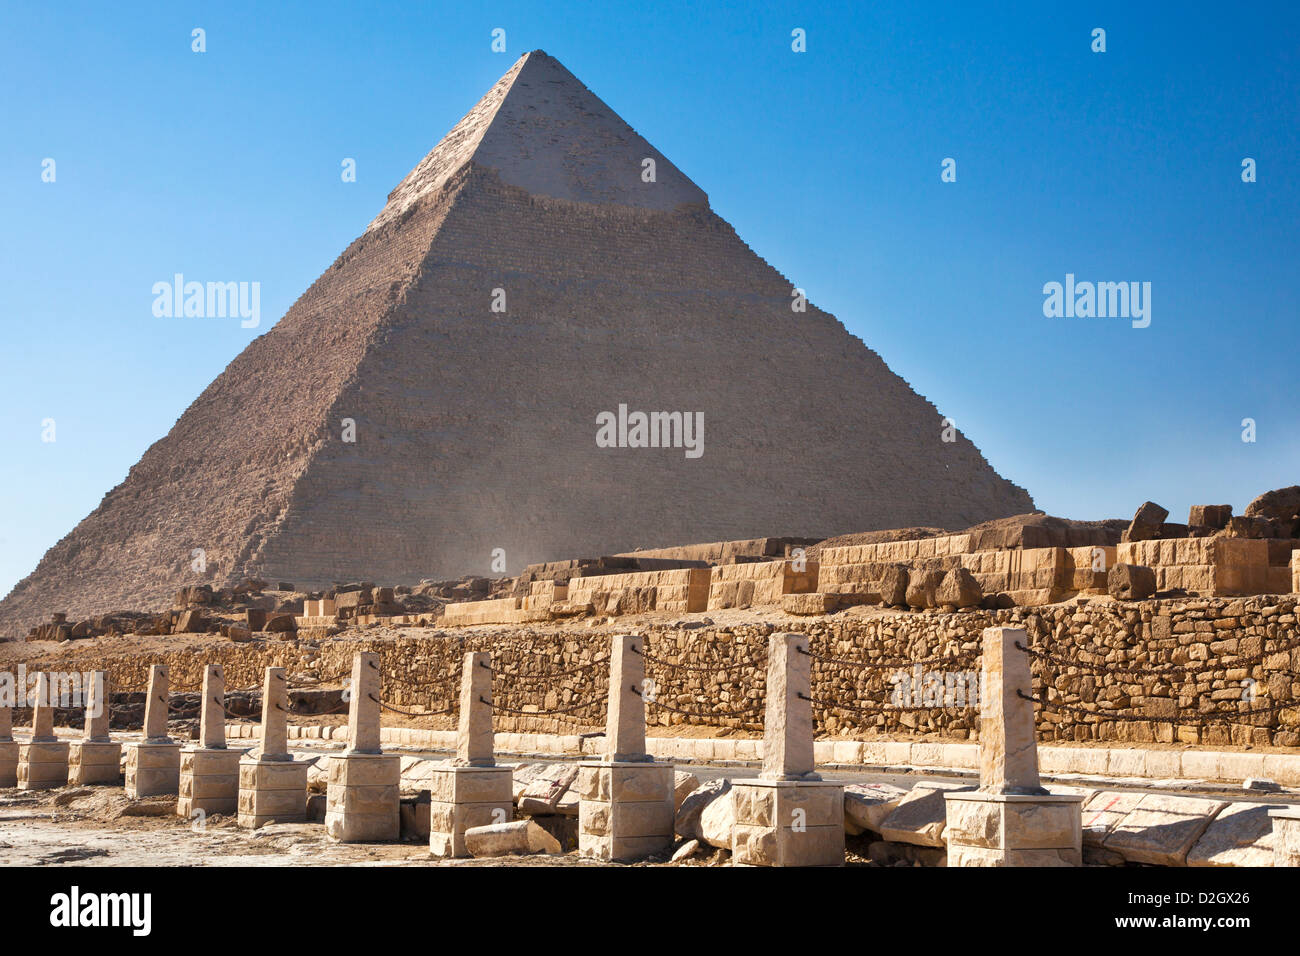 Pyramid of Khafre,Chephren,or Chefren,is the second-largest of the complex or necropolis on the Giza plateau near Cairo,Egypt Stock Photo